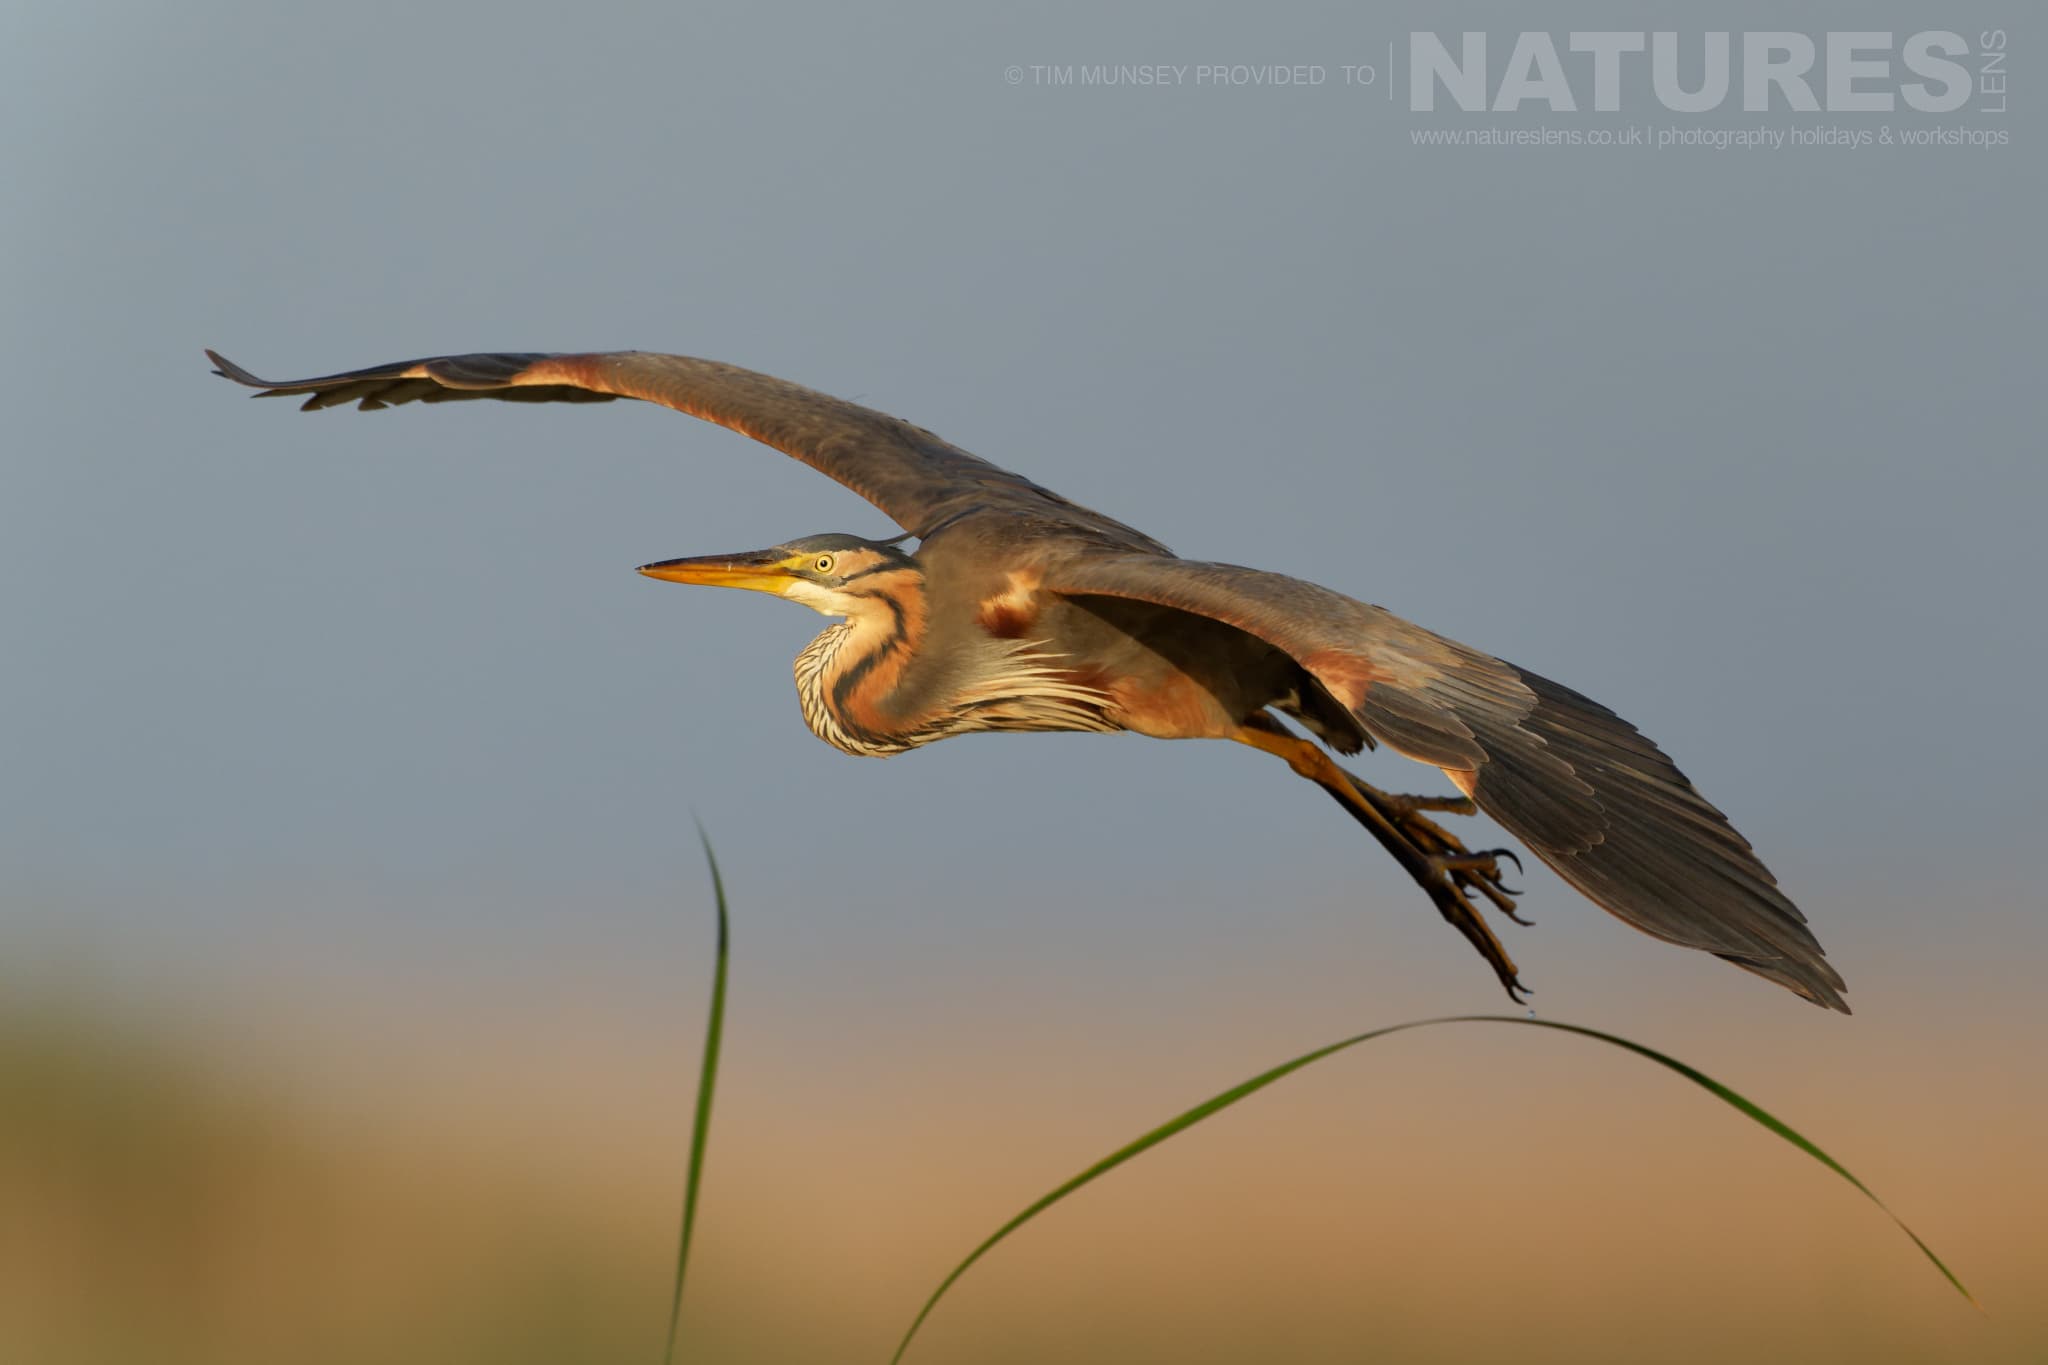 A Purple Heron In Flight One Of The Species That Features On The Natureslens Birds Of The Danube Delta Photography Holiday